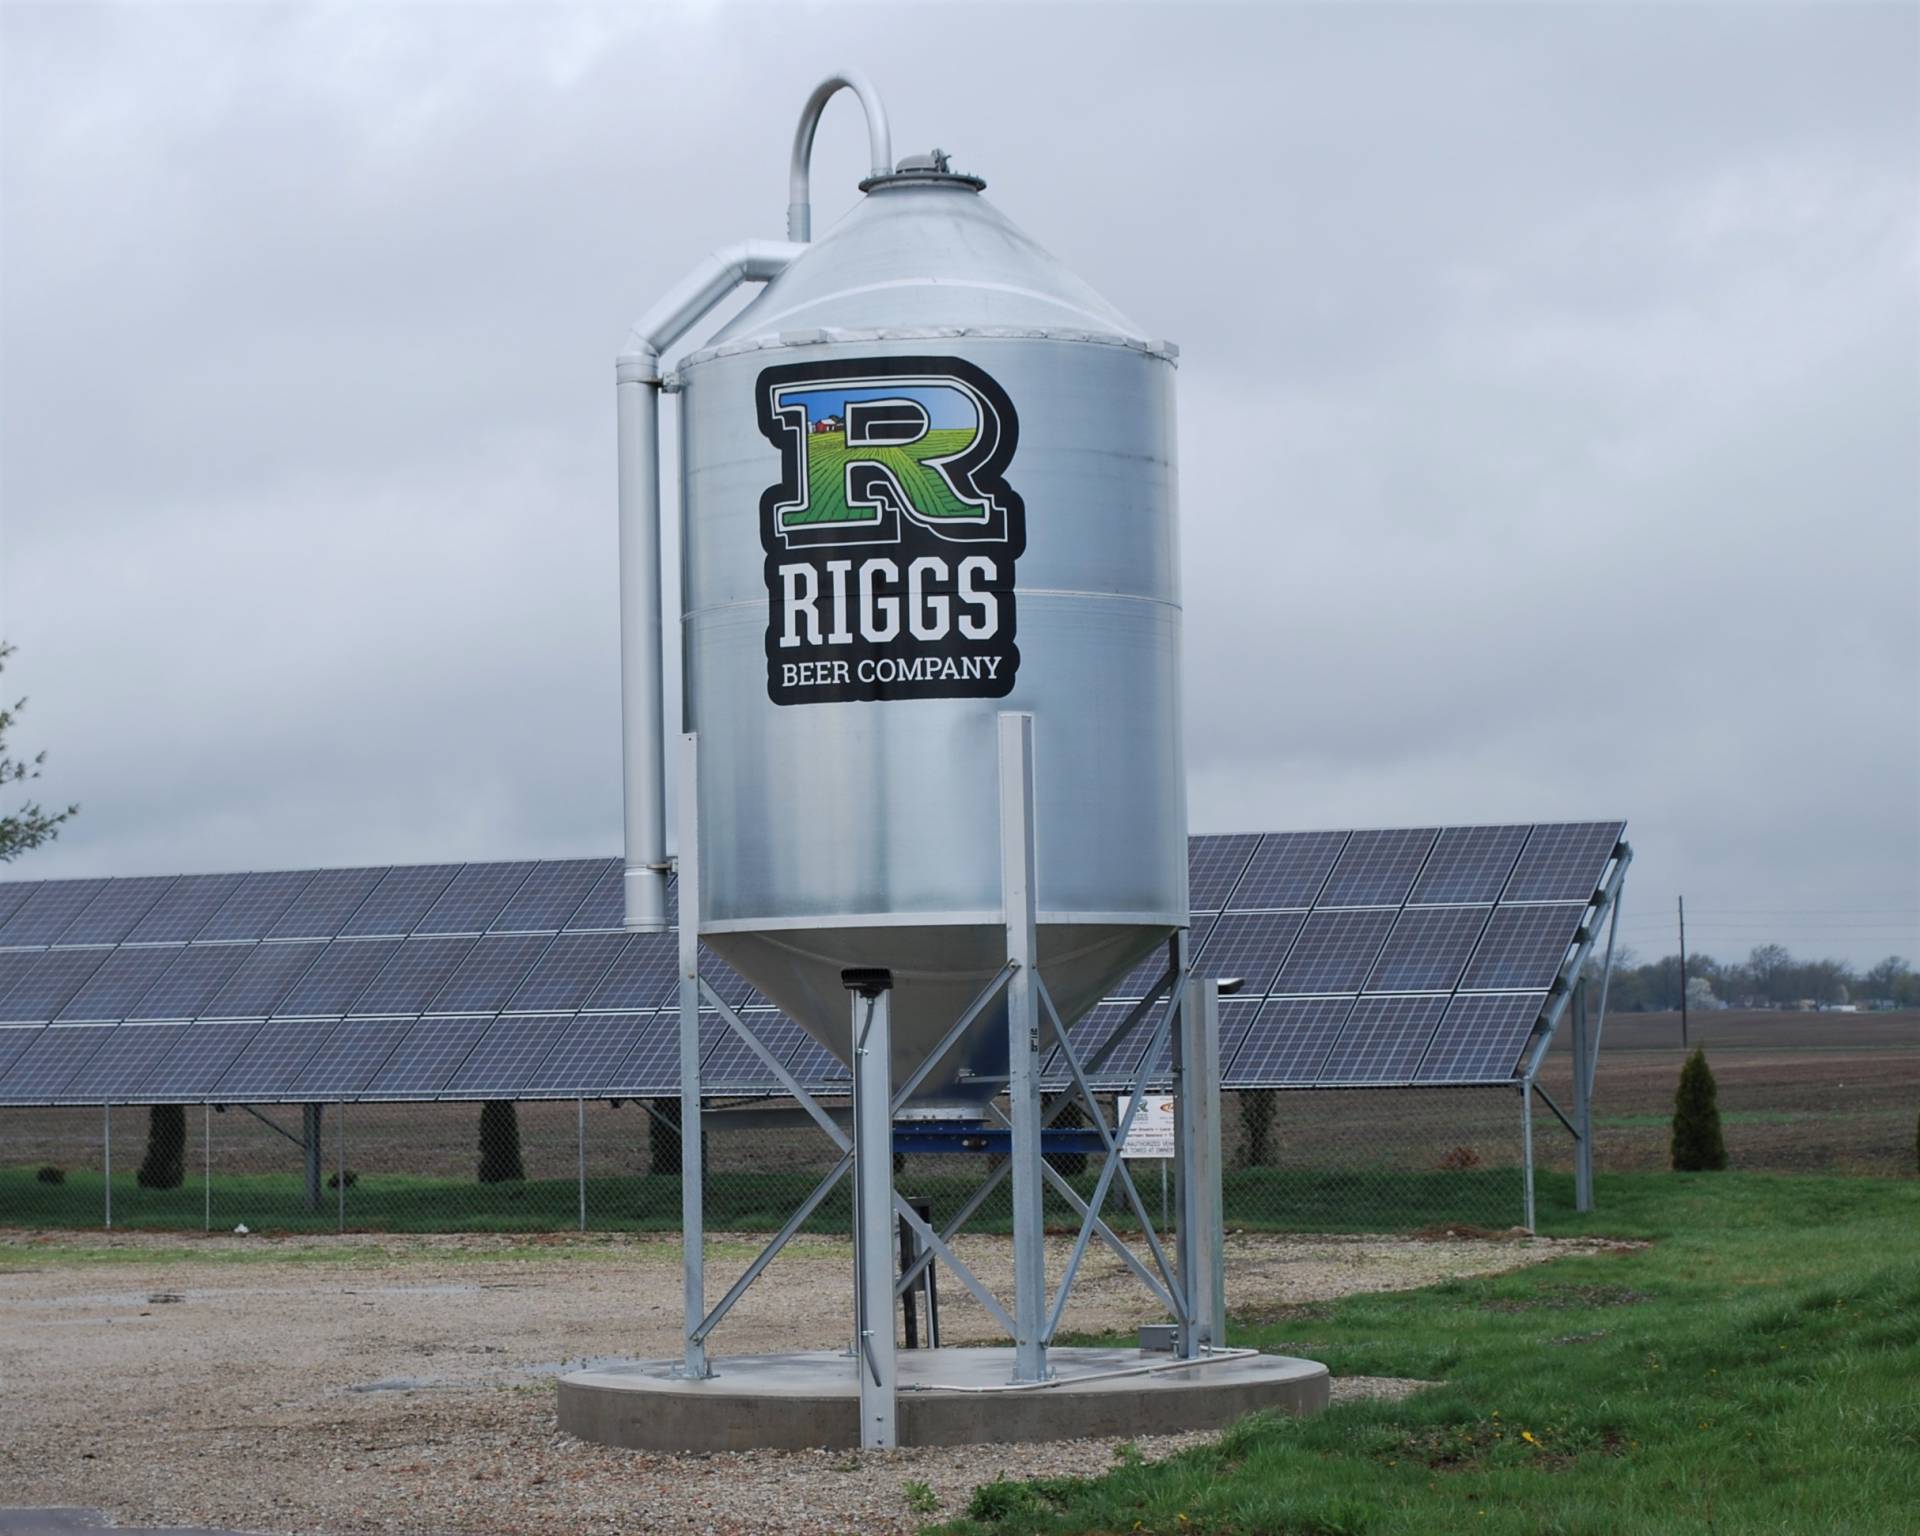 Riggs Beer company